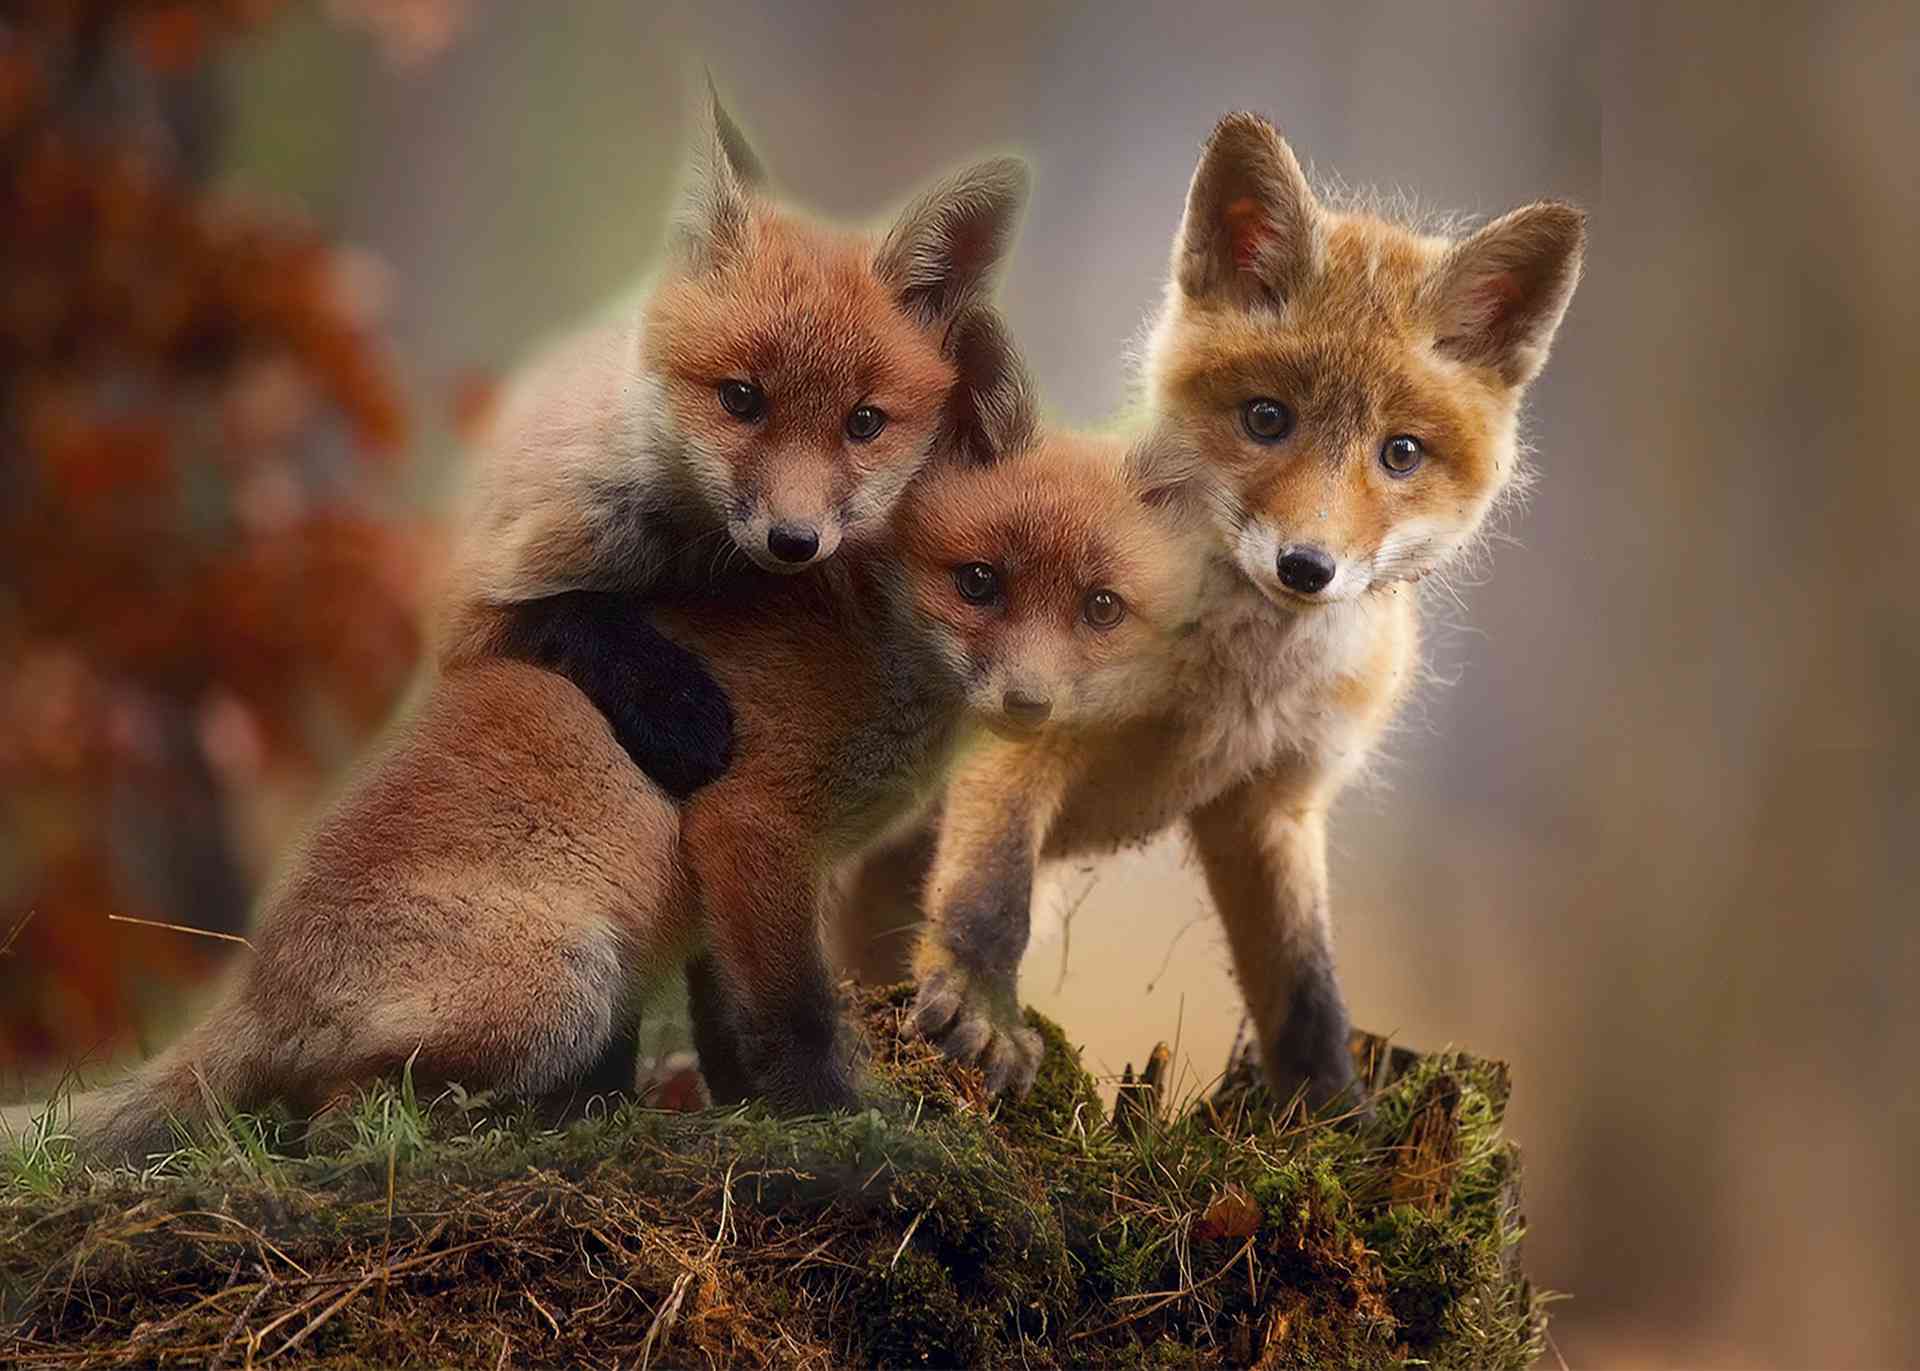 Three baby red foxes looking at the camera.